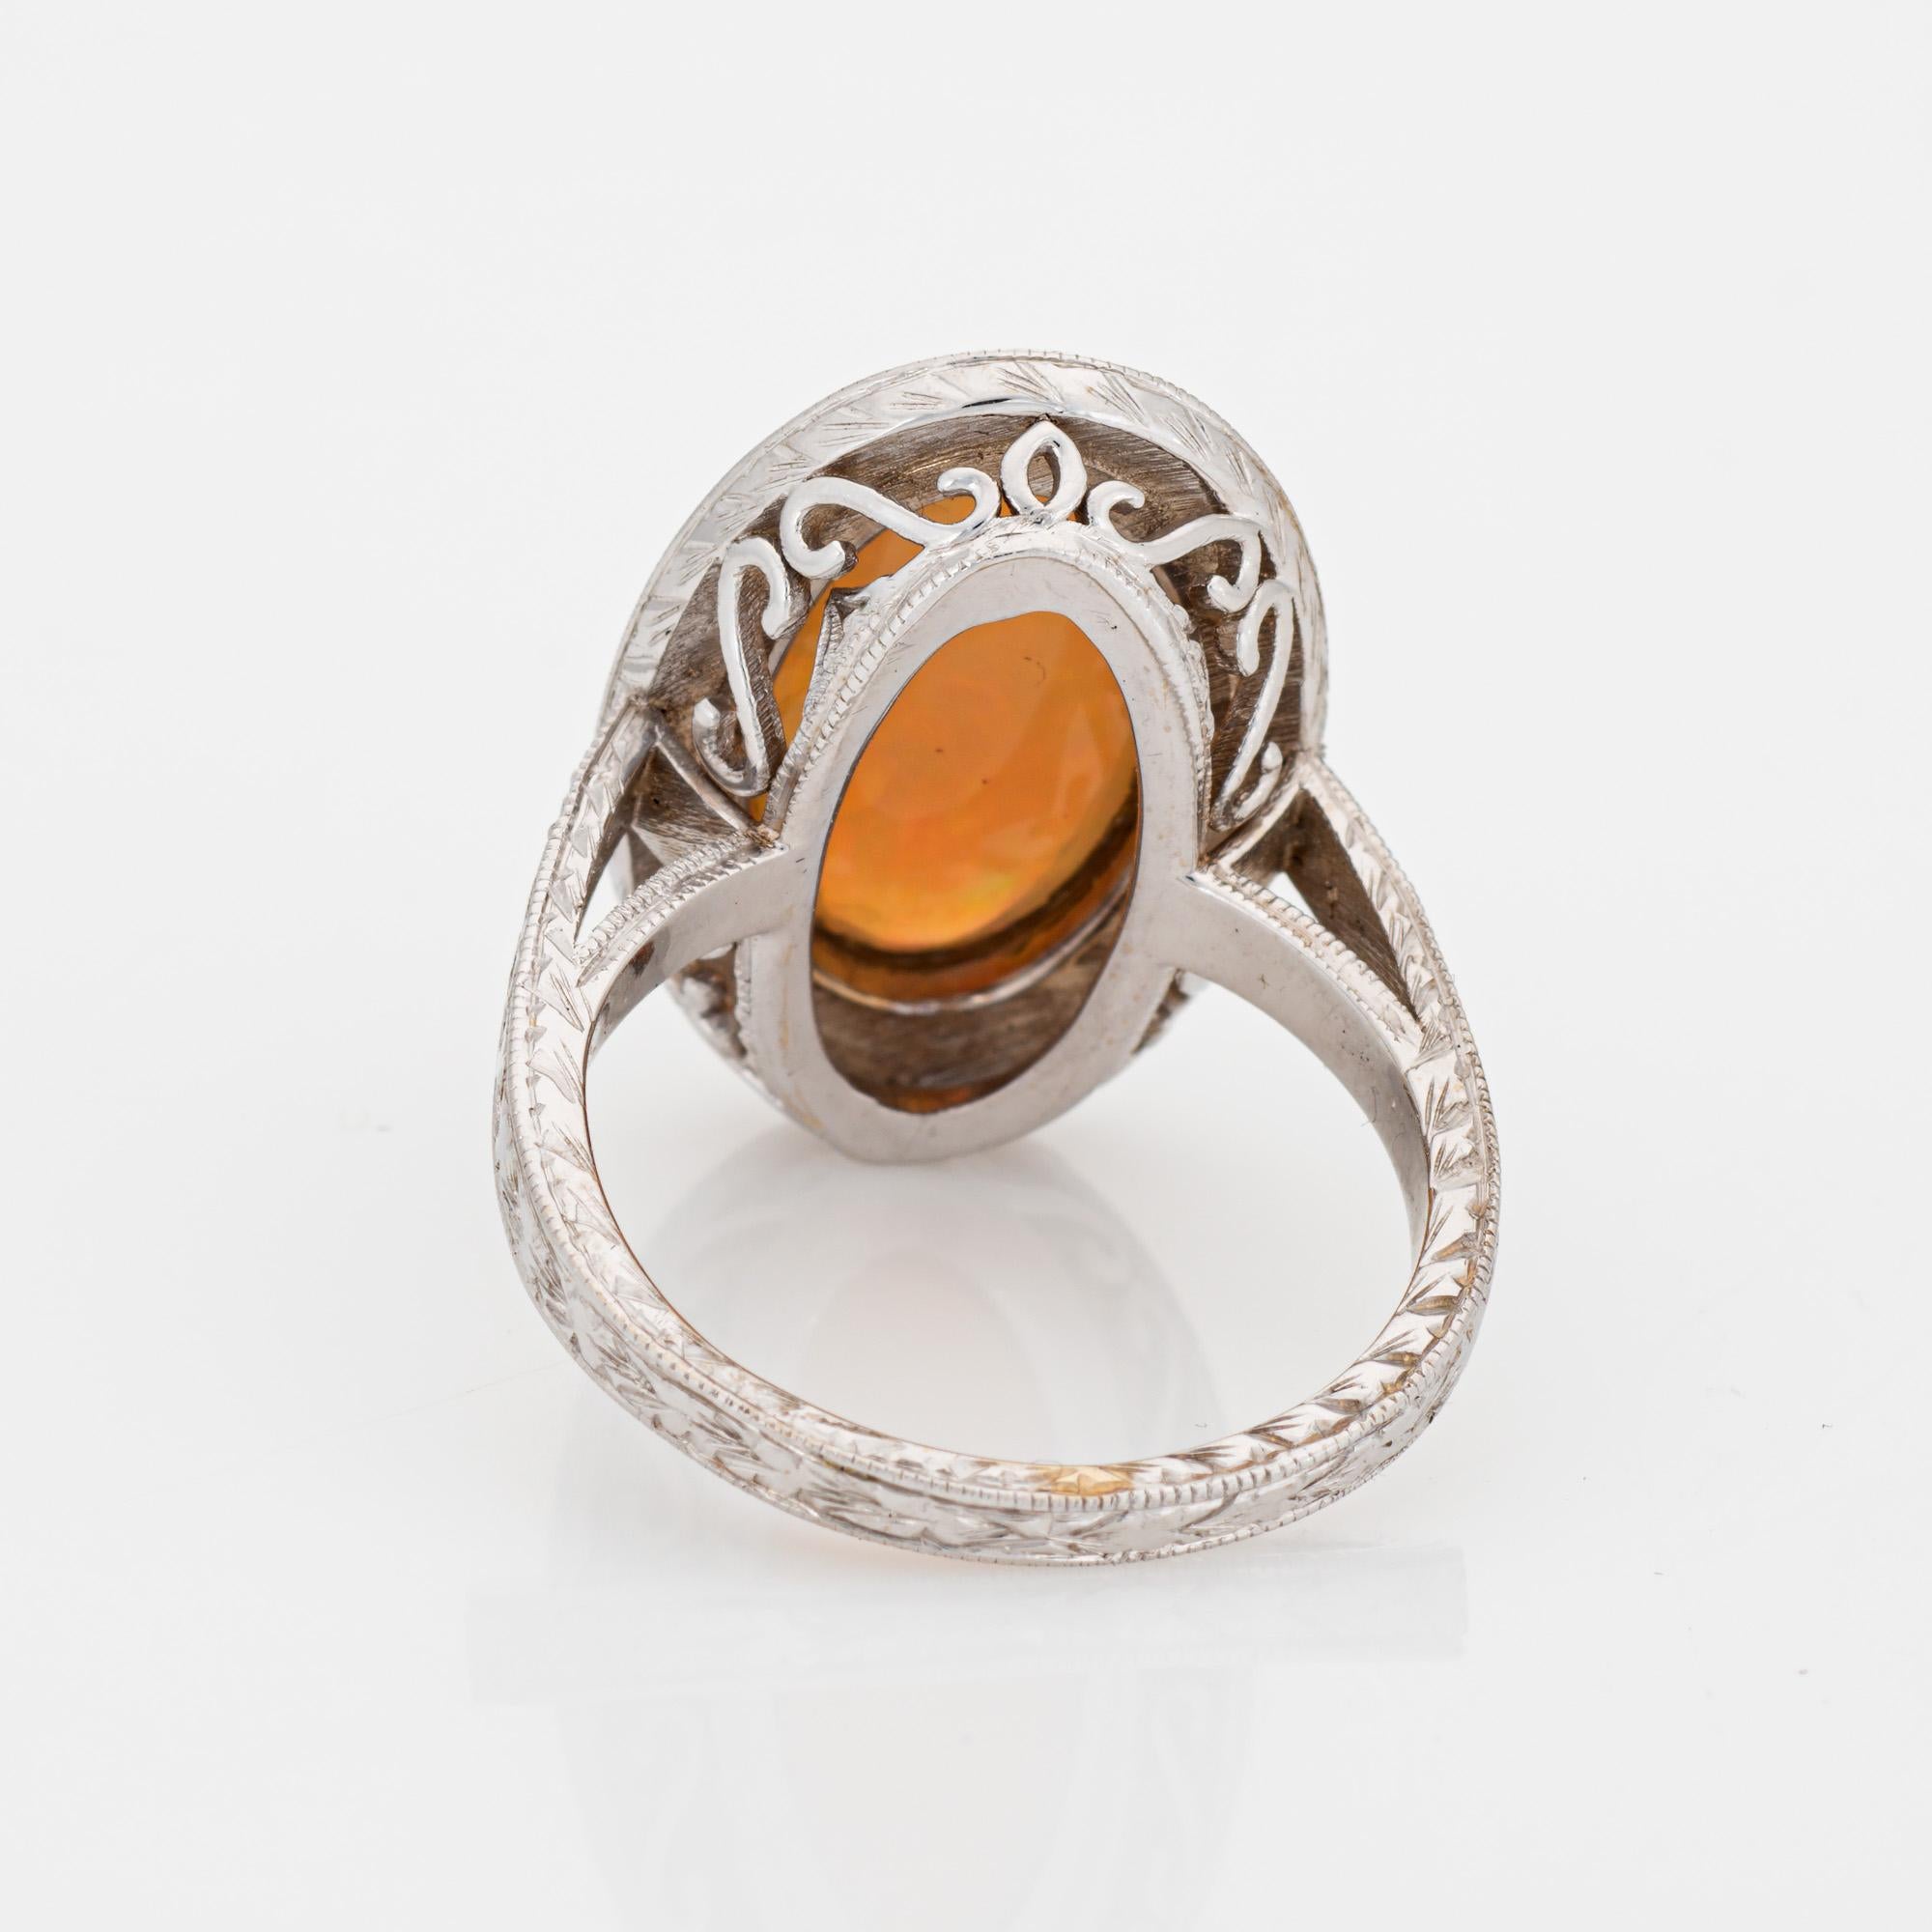 Fire Opal Diamond Ring Large Oval Estate 18k White Gold Sz 9 Cocktail Fine Jewel In Good Condition For Sale In Torrance, CA